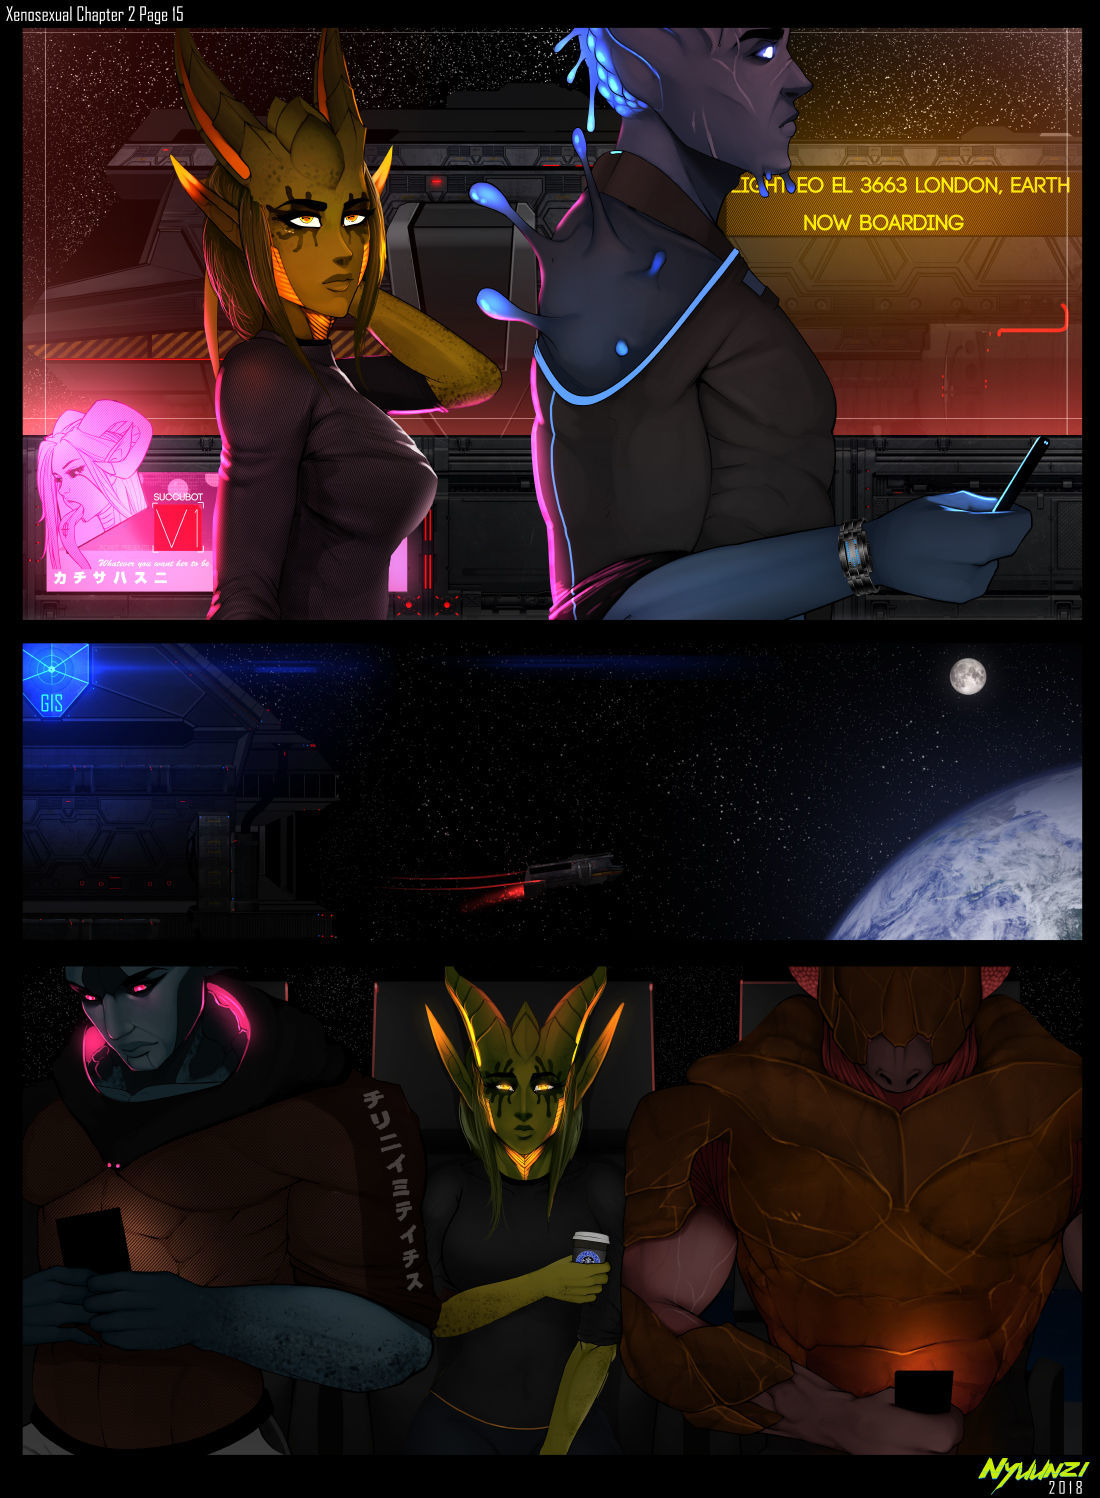 Xenosexual Mass Effect page 28